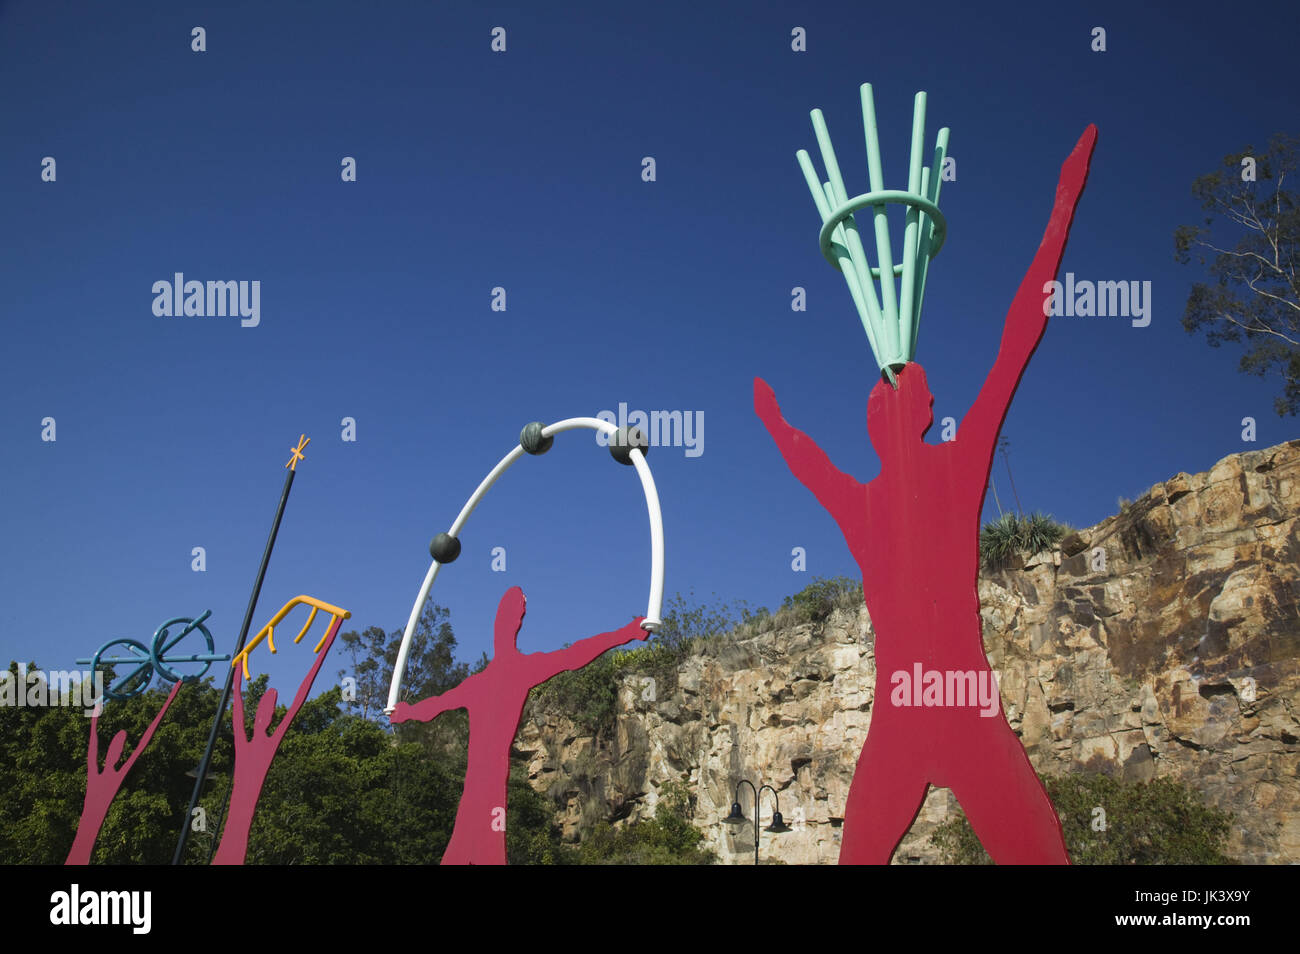 Australia, Queensland, Brisbane, Southbank District, View Red figures by the Cliffs Rock Cliff Climbing Area, Stock Photo